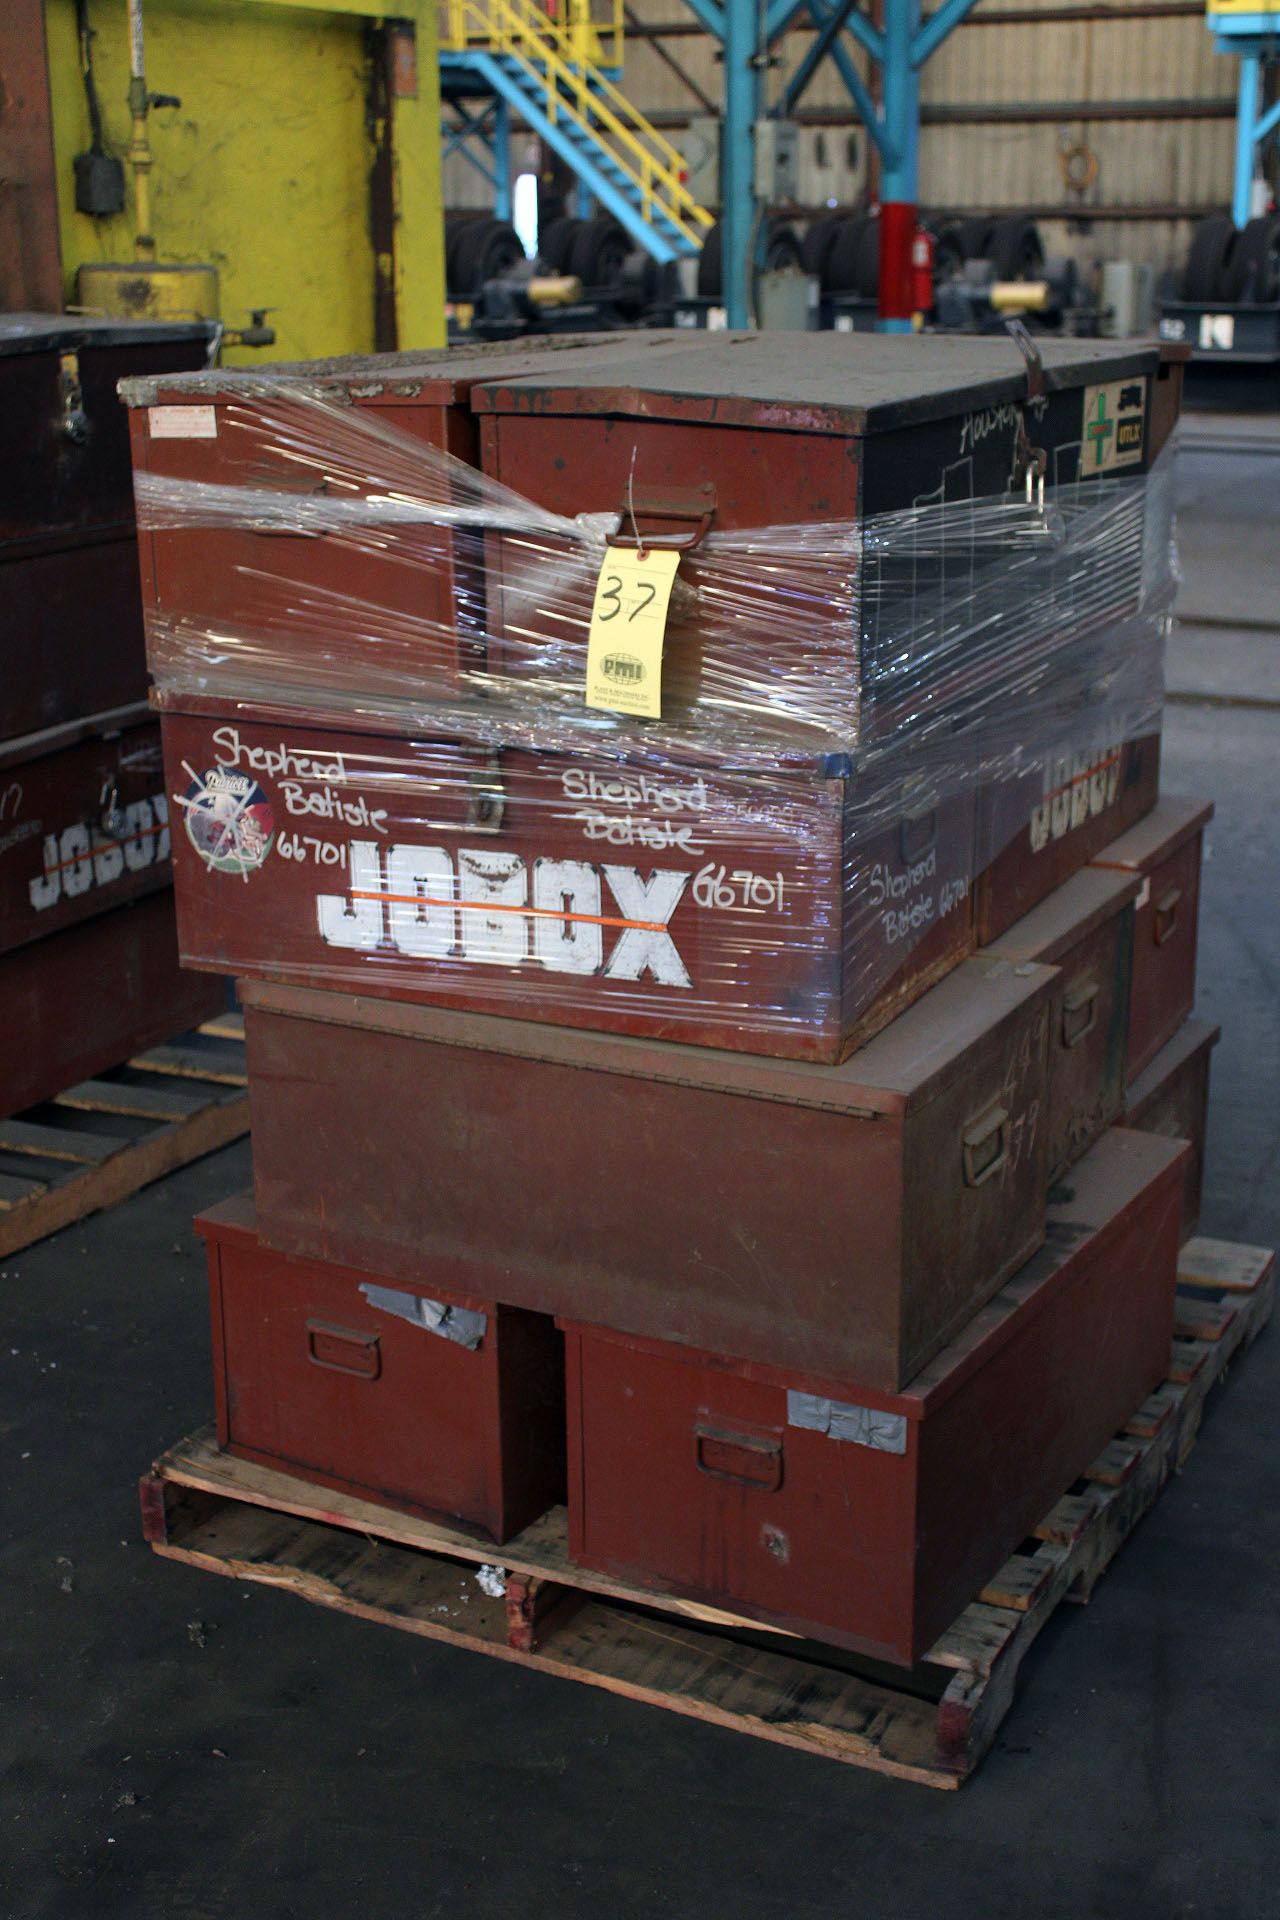 LOT OF TOOLBOXES (approx. 11), JOBOX MDL. 650990 (on one pallet)